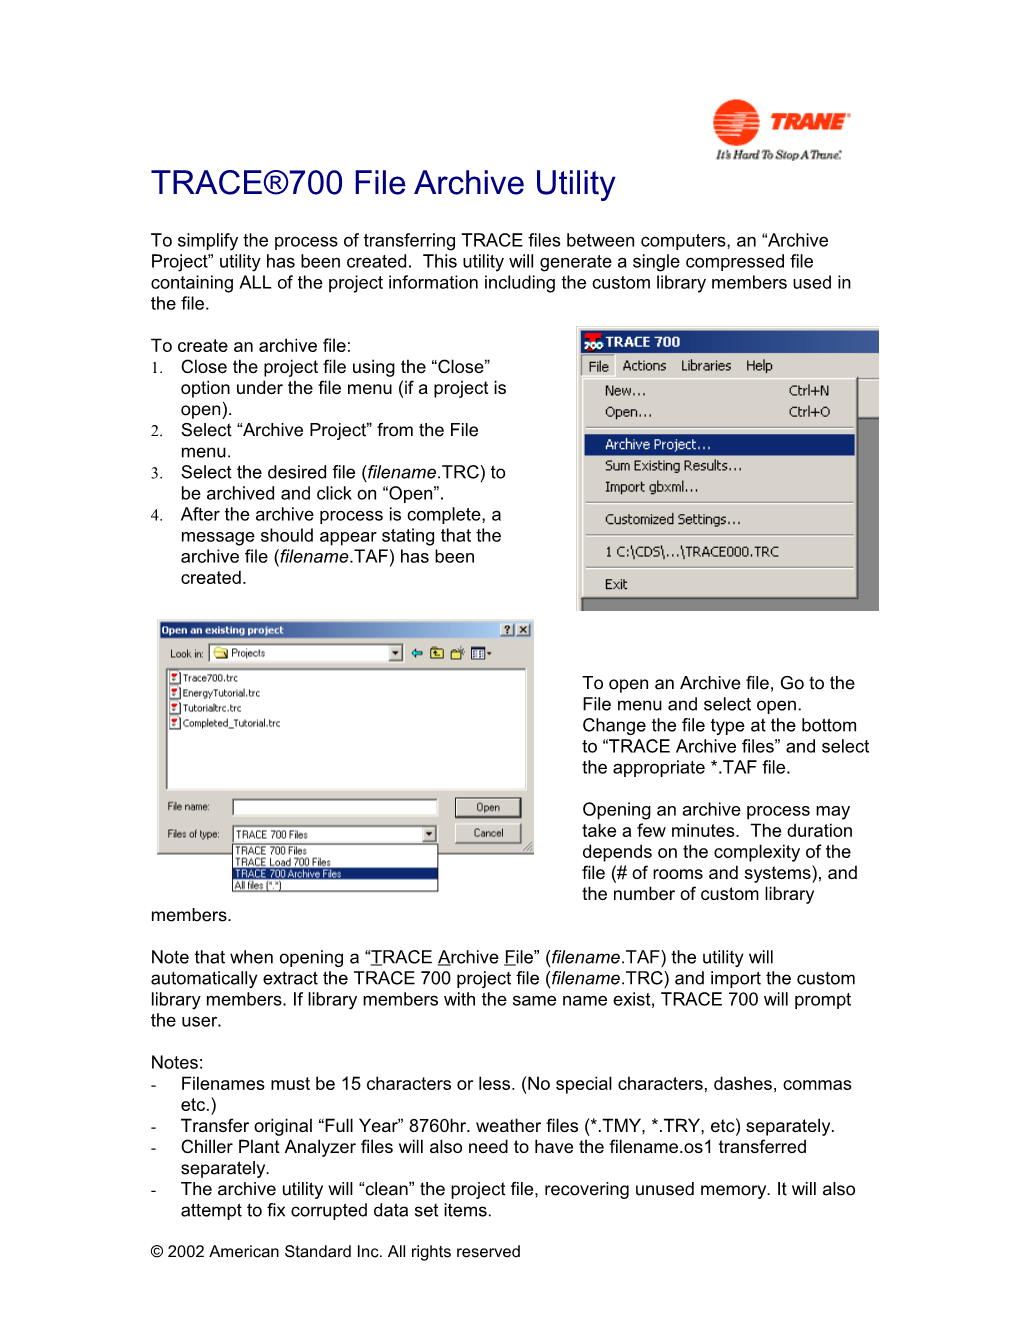 TRACE 700 File Archive Utility